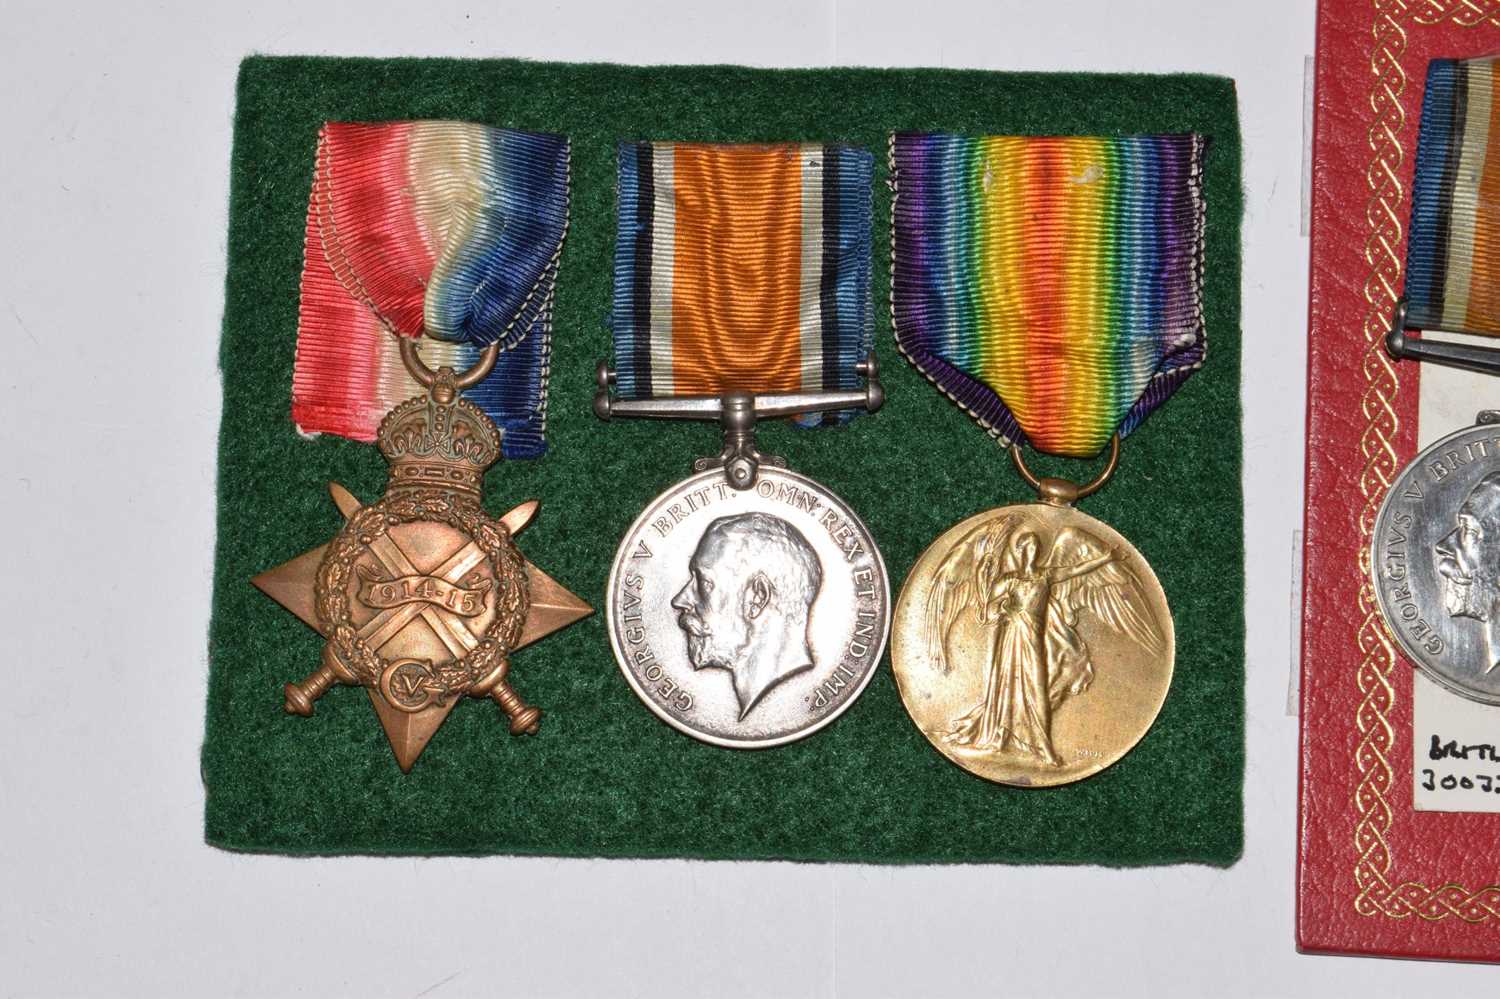 British First World War medal pair and trio - Image 2 of 5